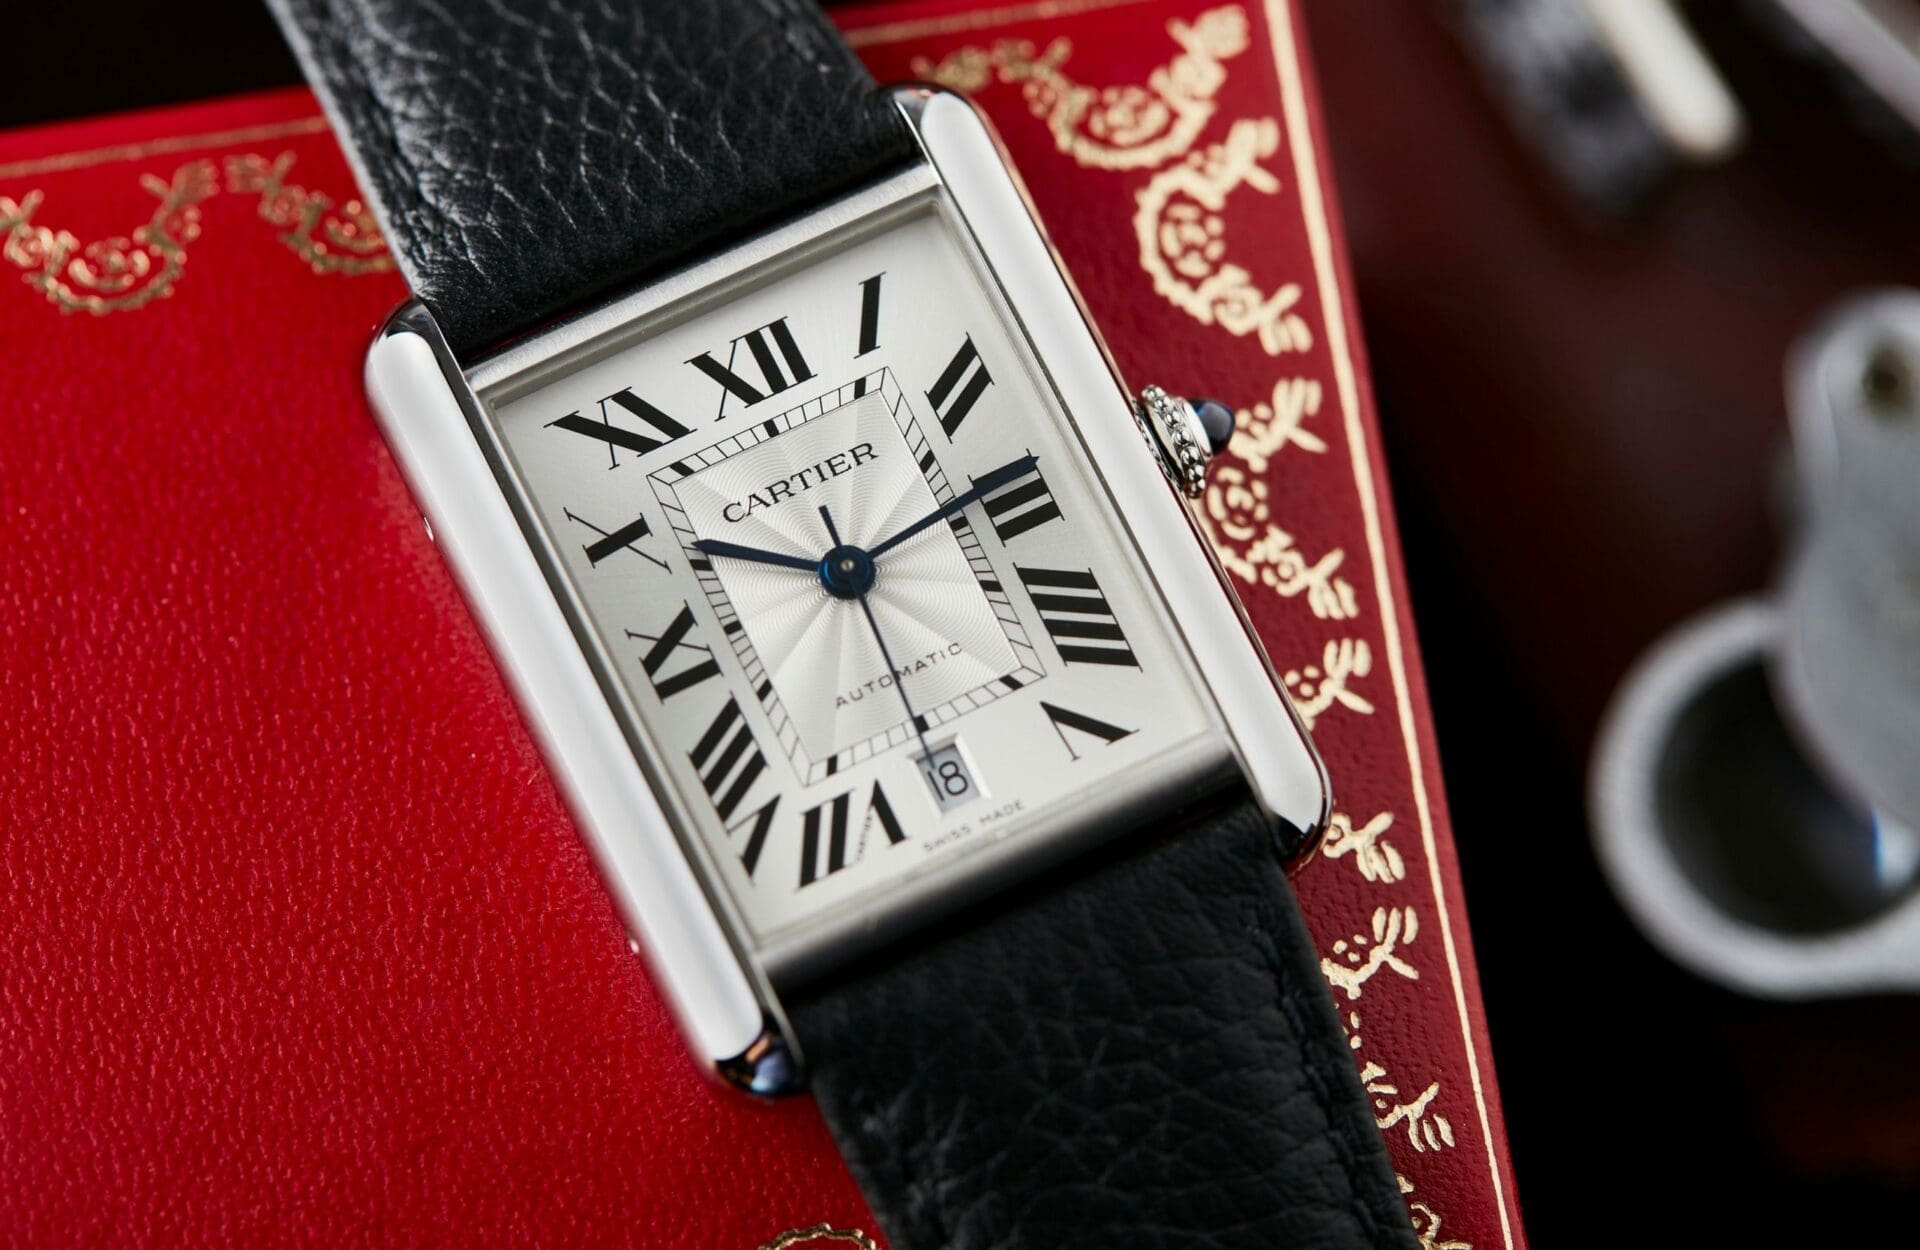 HANDS-ON: The Cartier Tank Must Collection offers classic design at an accessible price